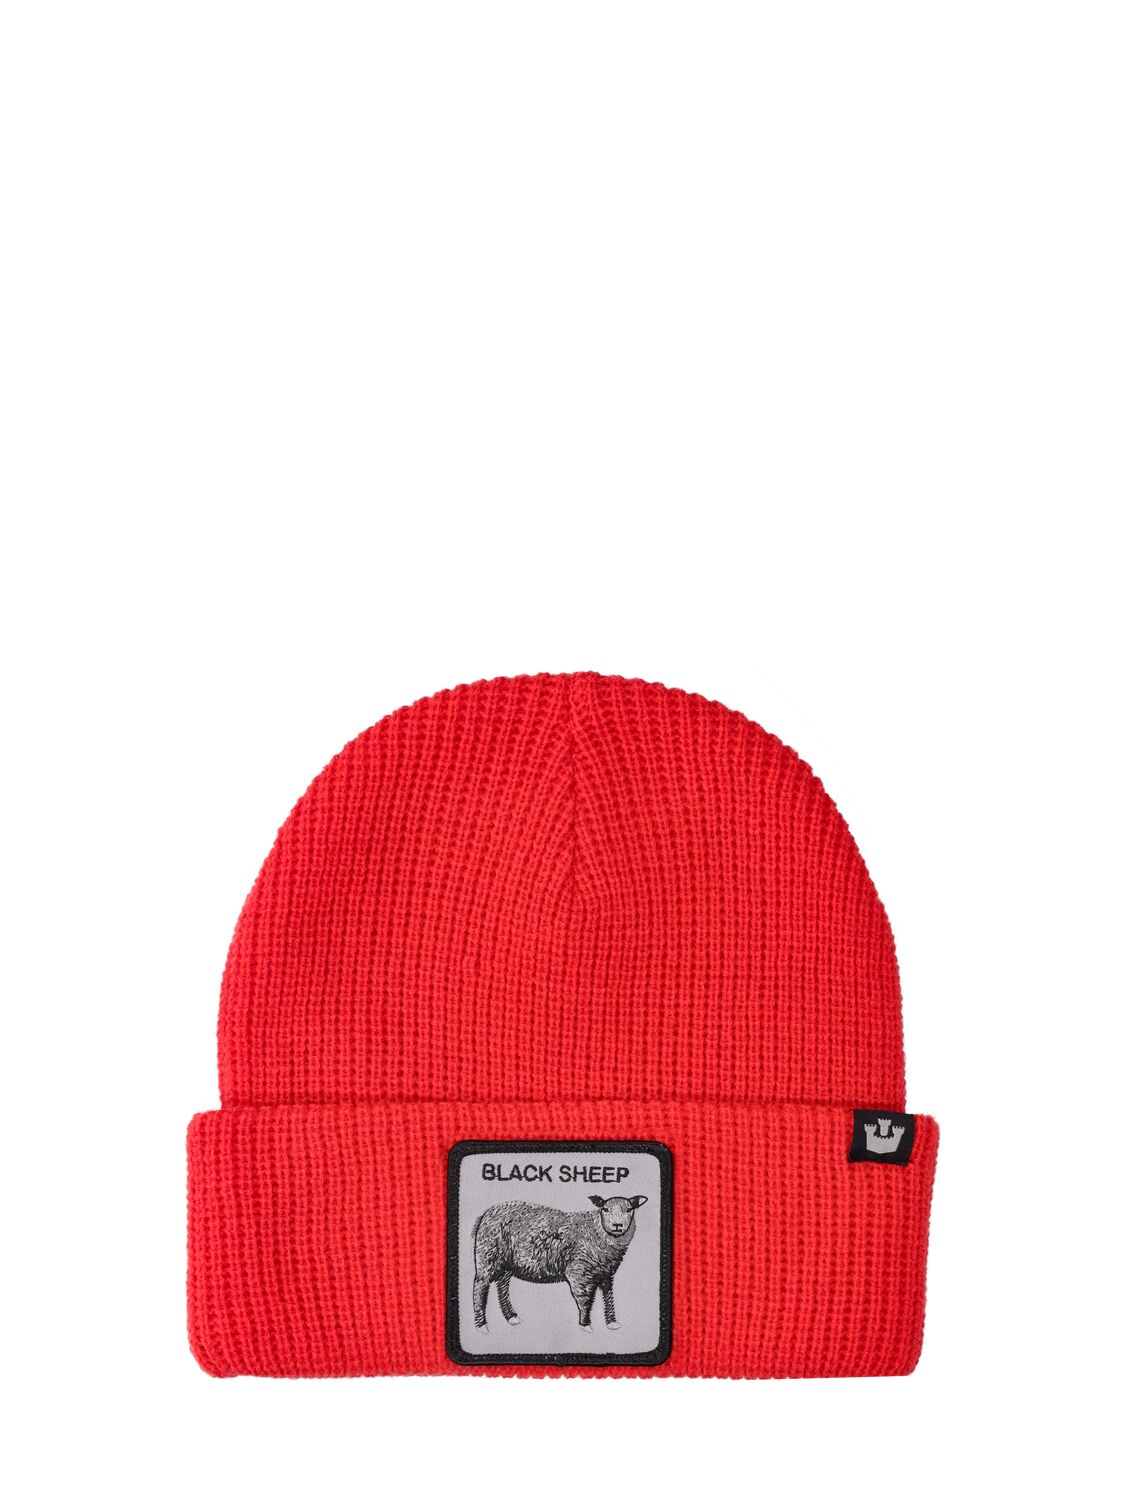 Image of Sheep This Knit Beanie